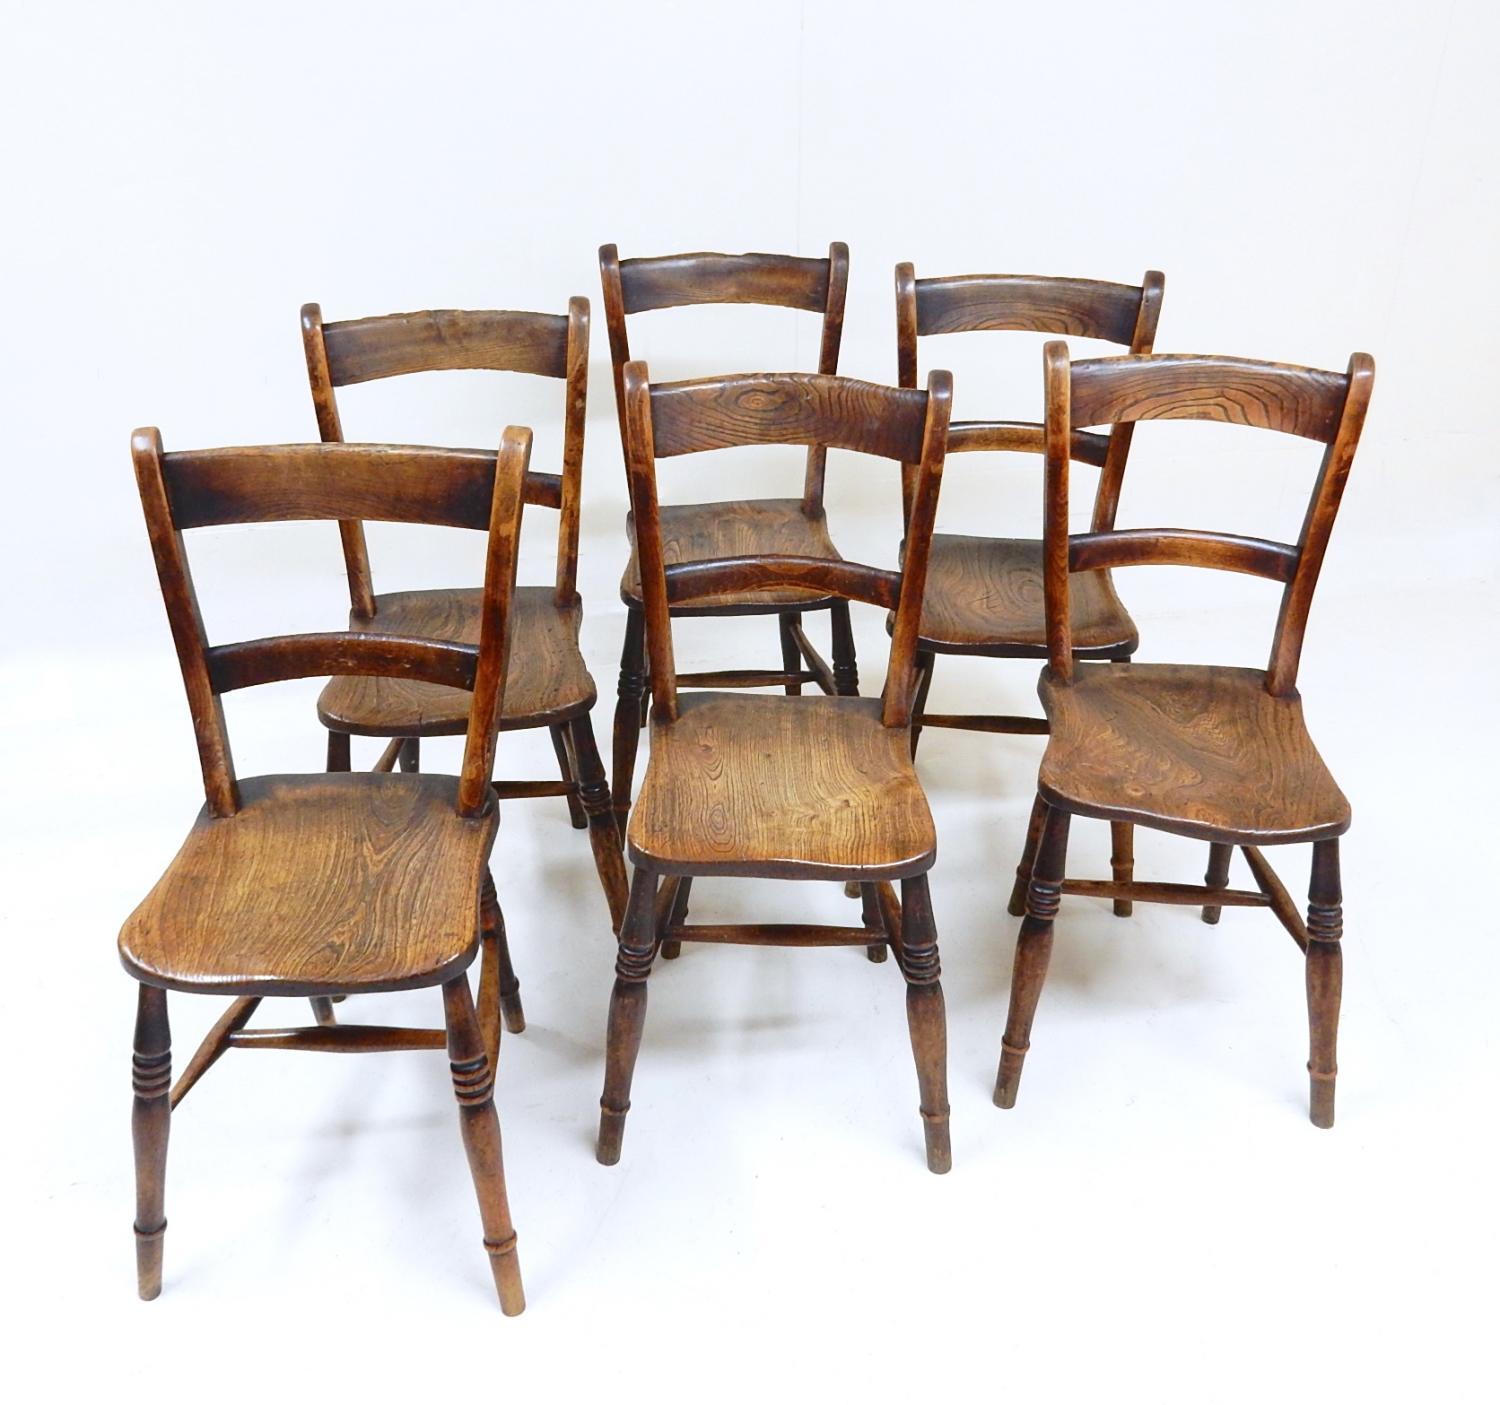 Antique Country Chair Set